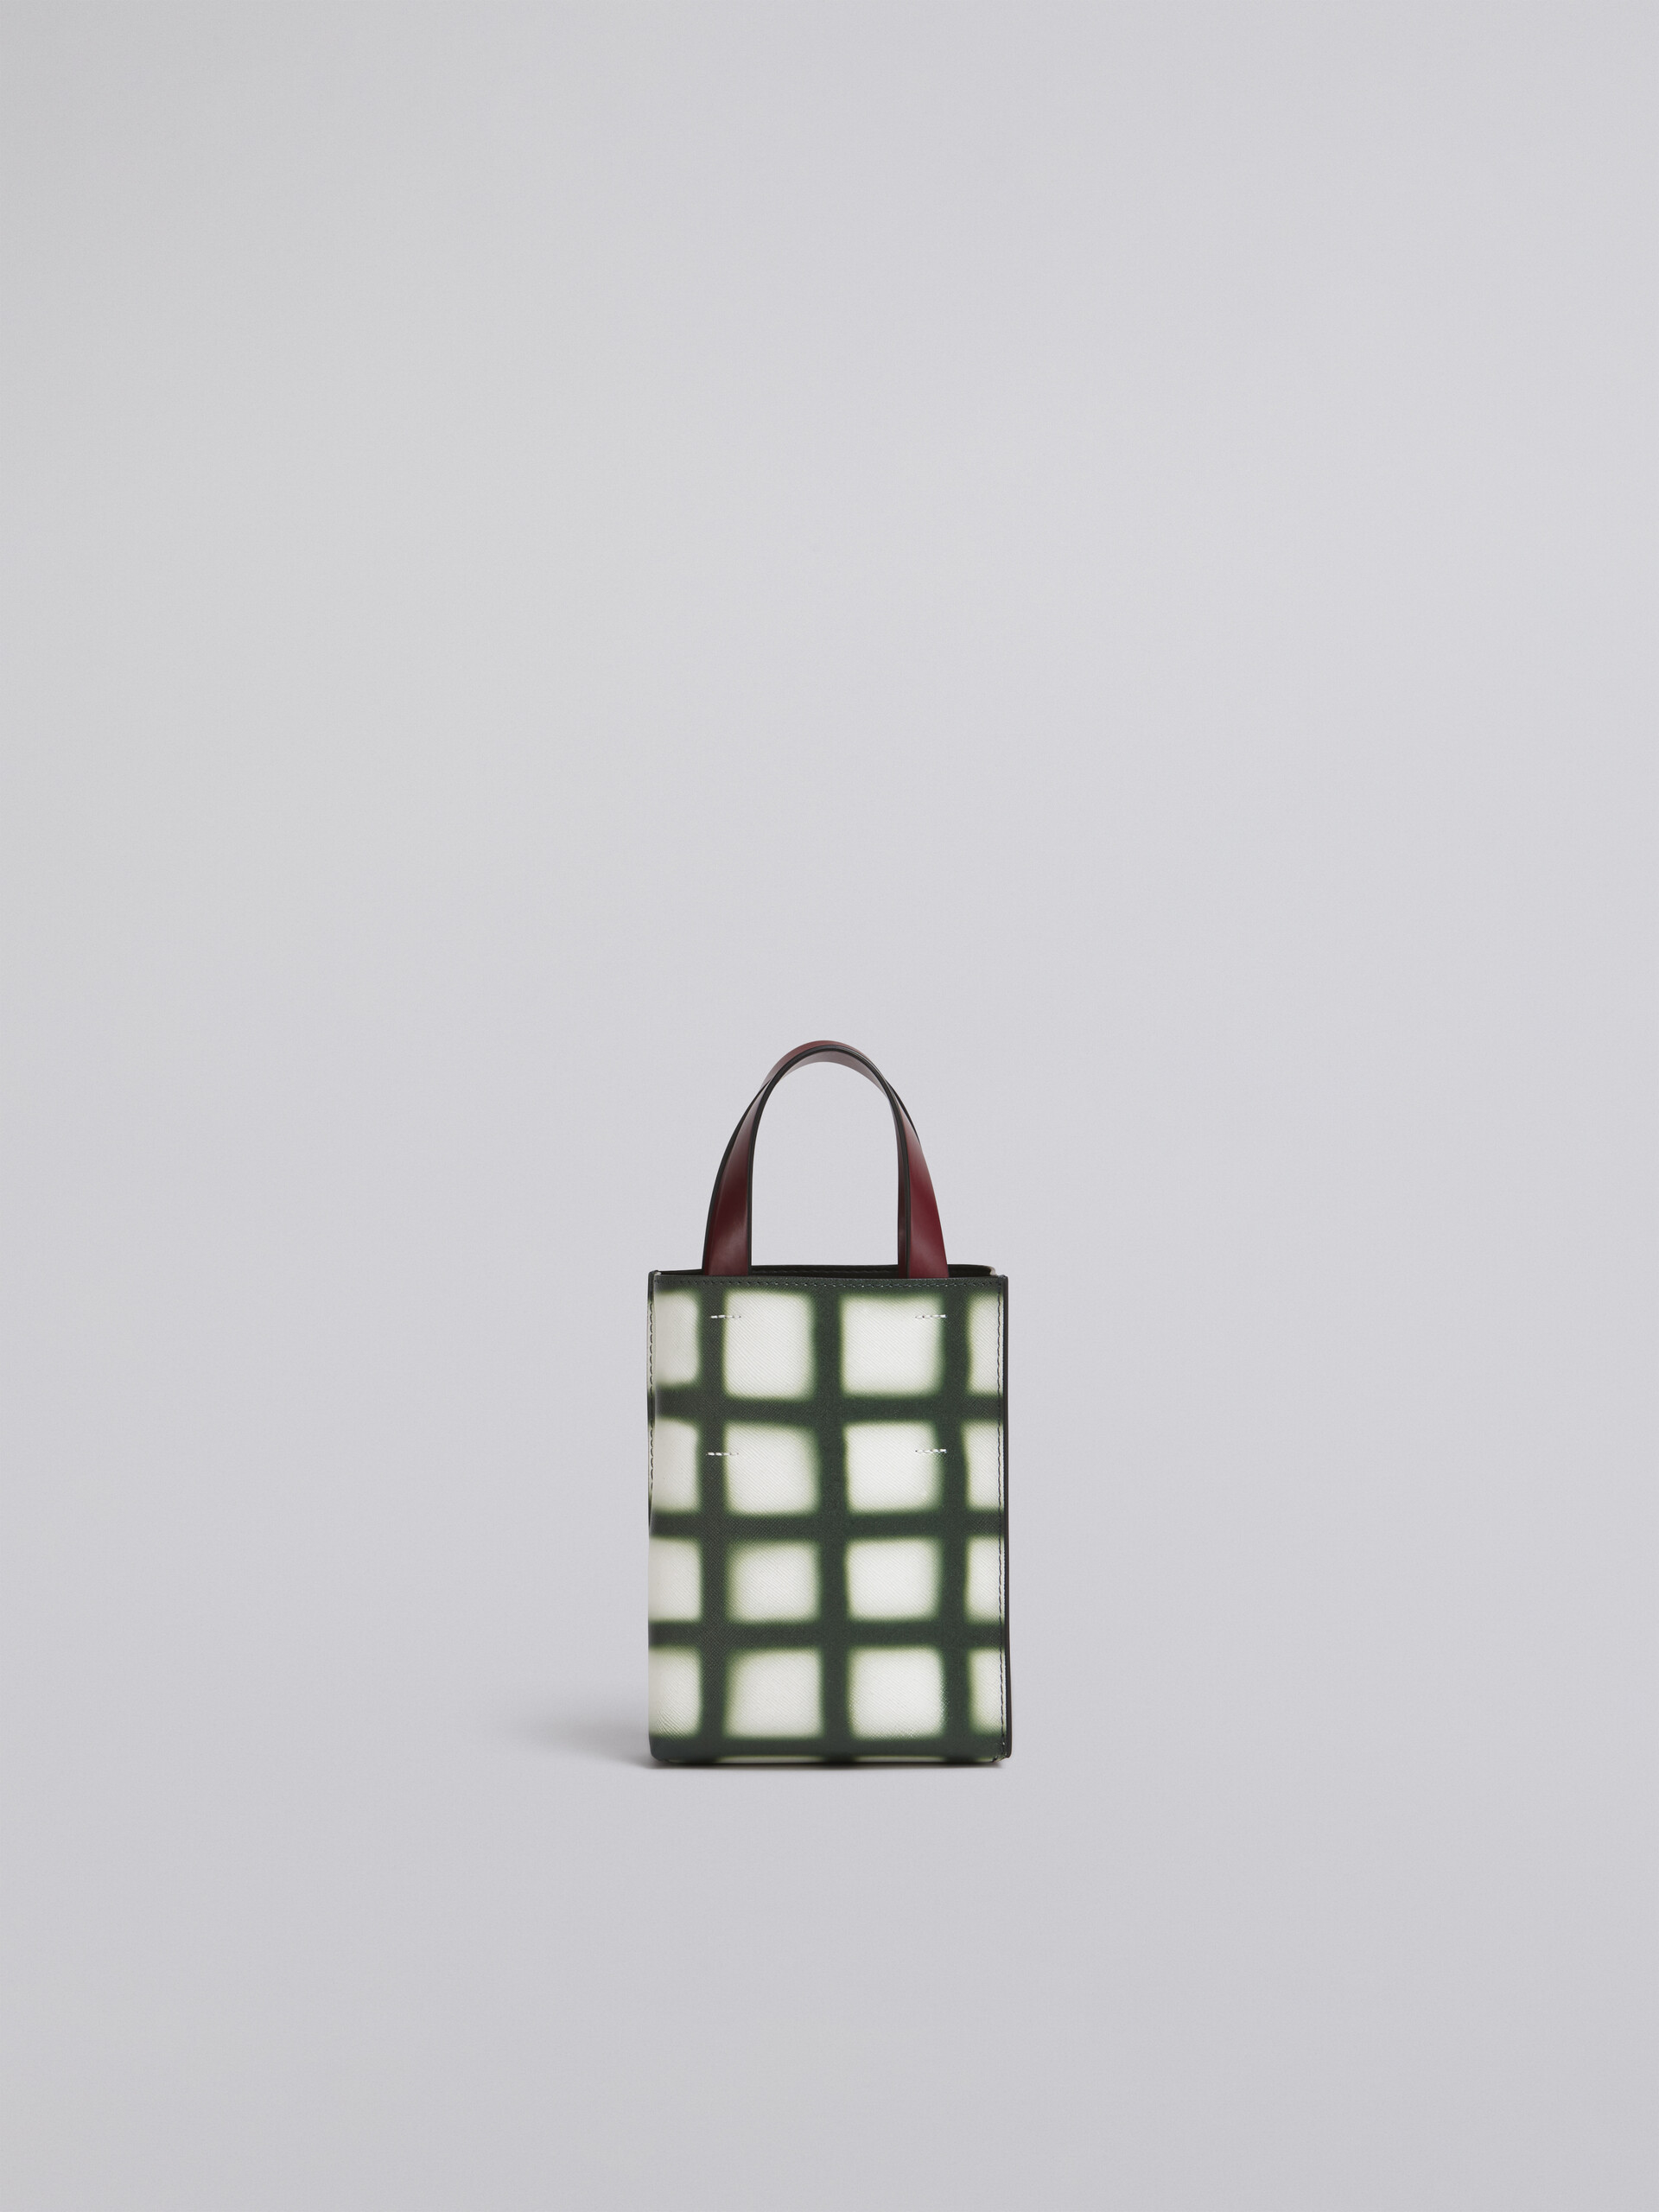 MUSEO bag in check printed saffiano calfskin - Shopping Bags - Image 1